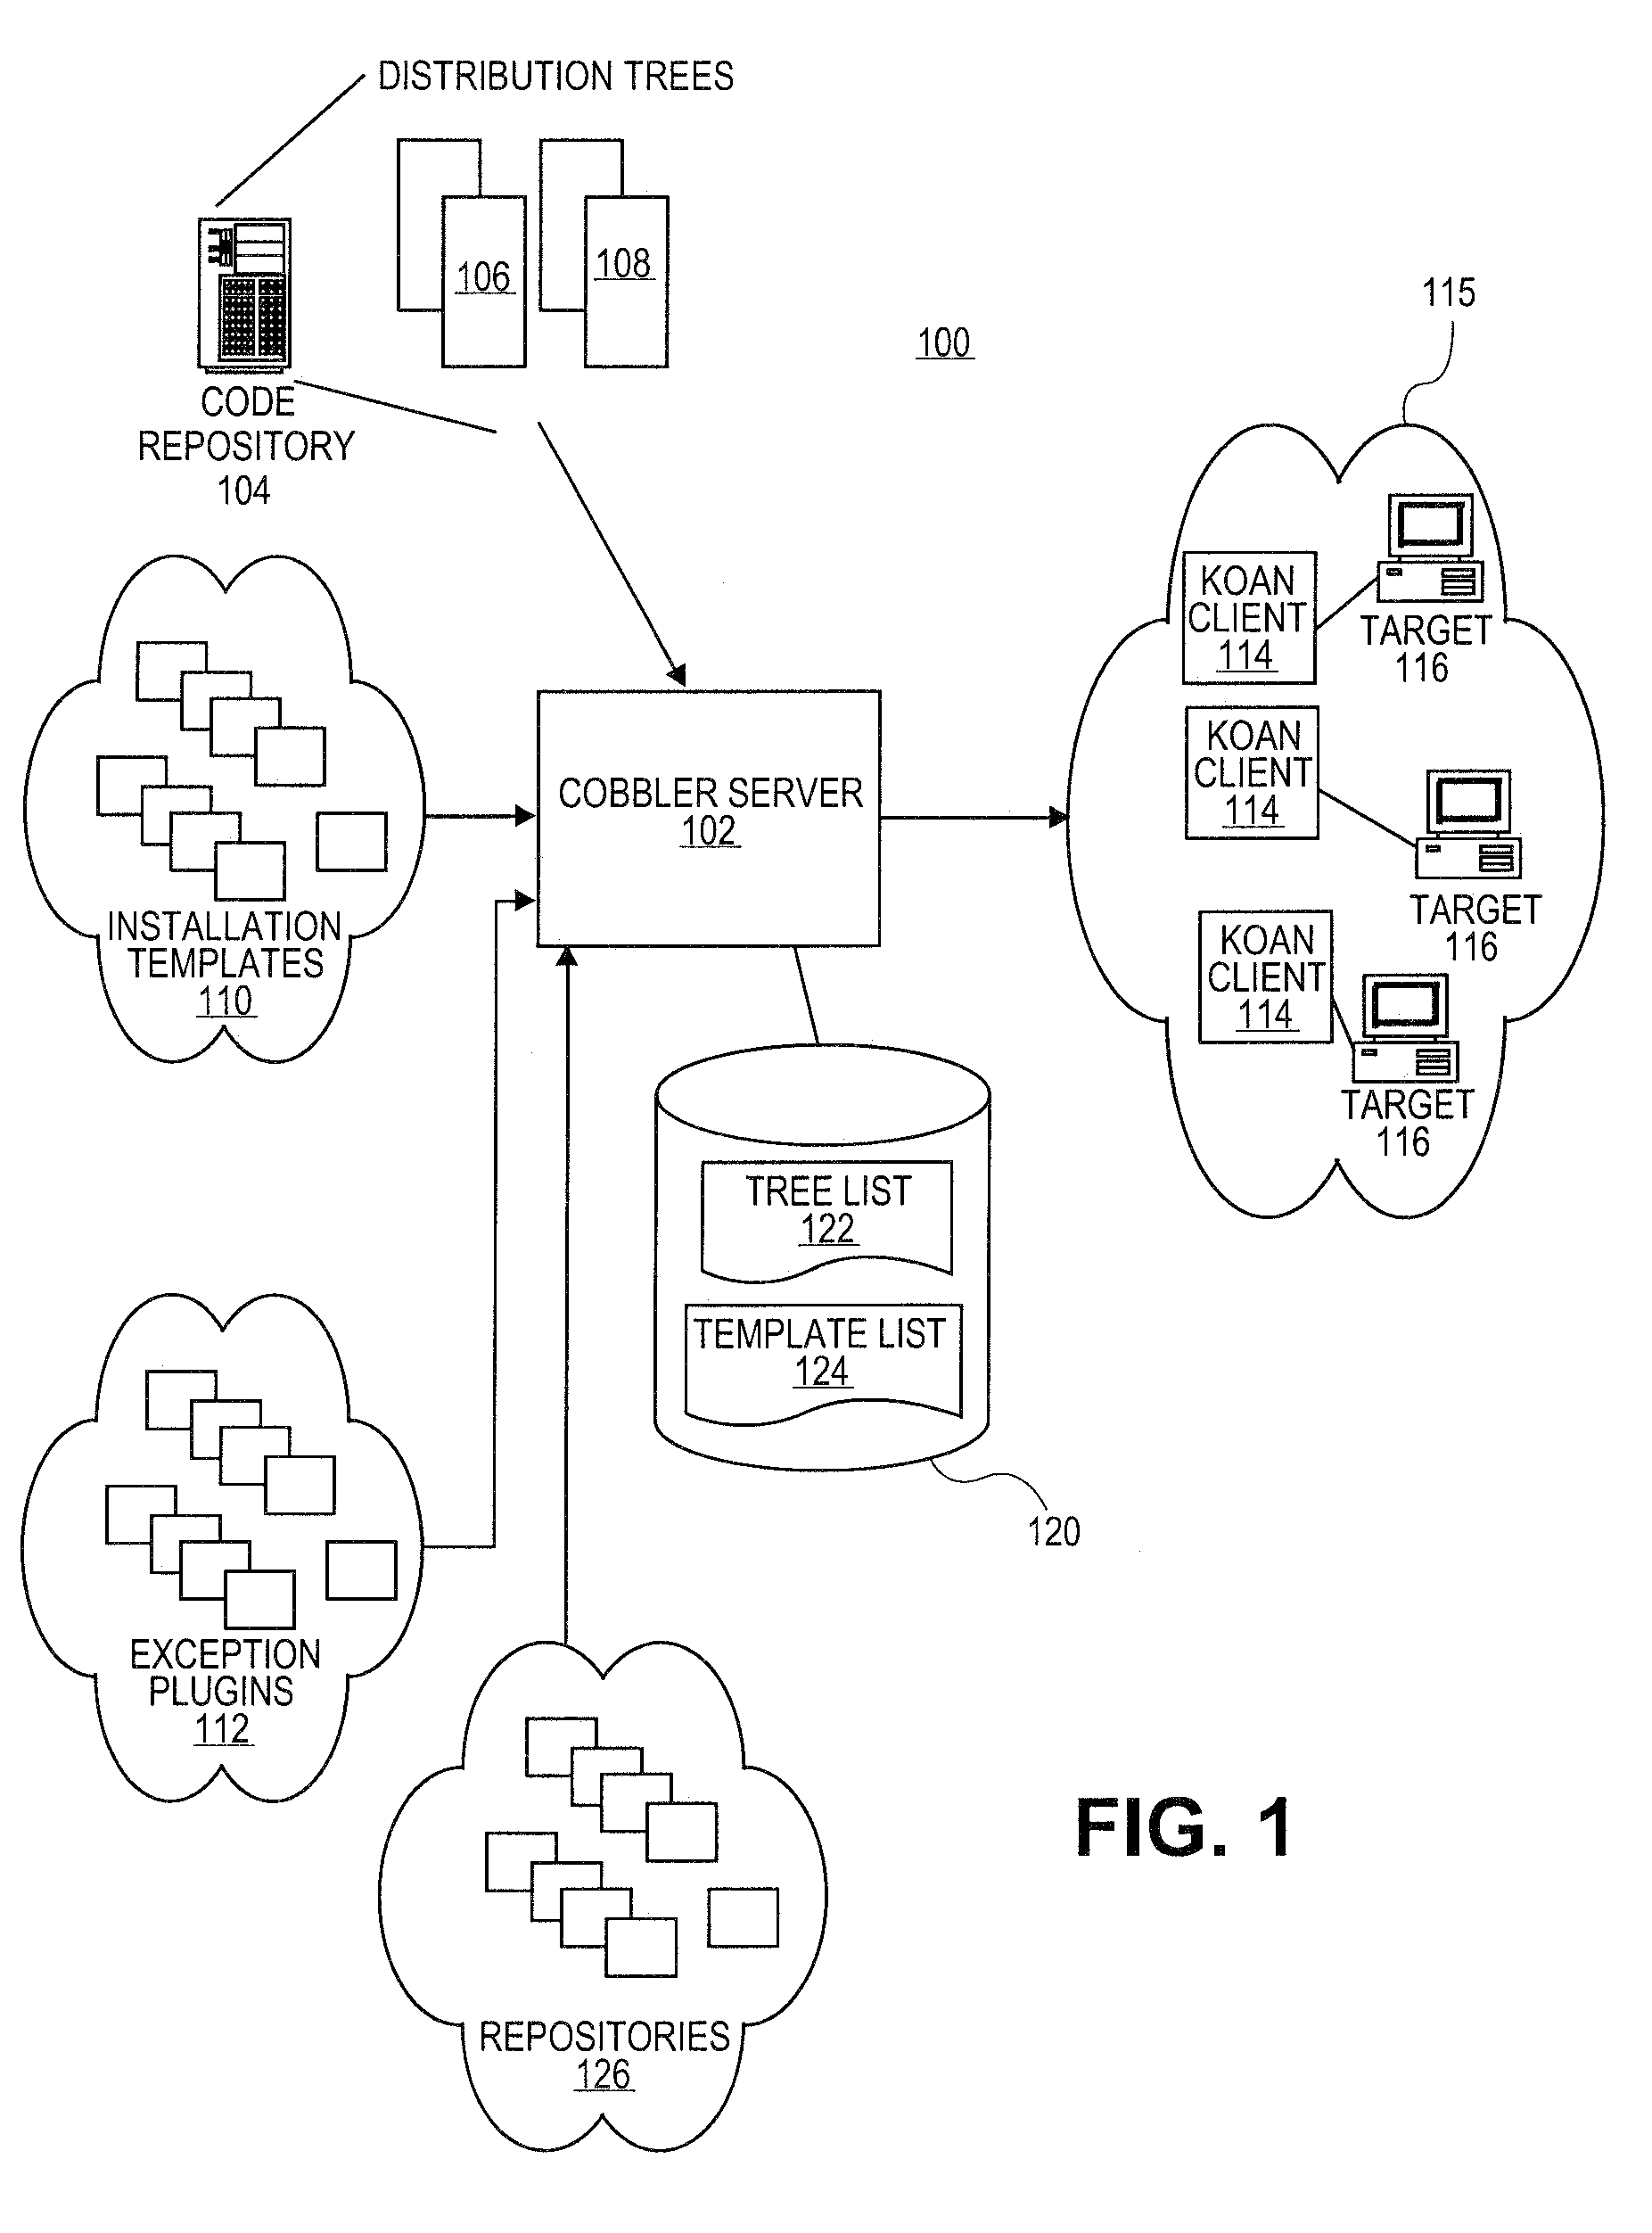 Systems and methods for integrating software provisioning and configuration management